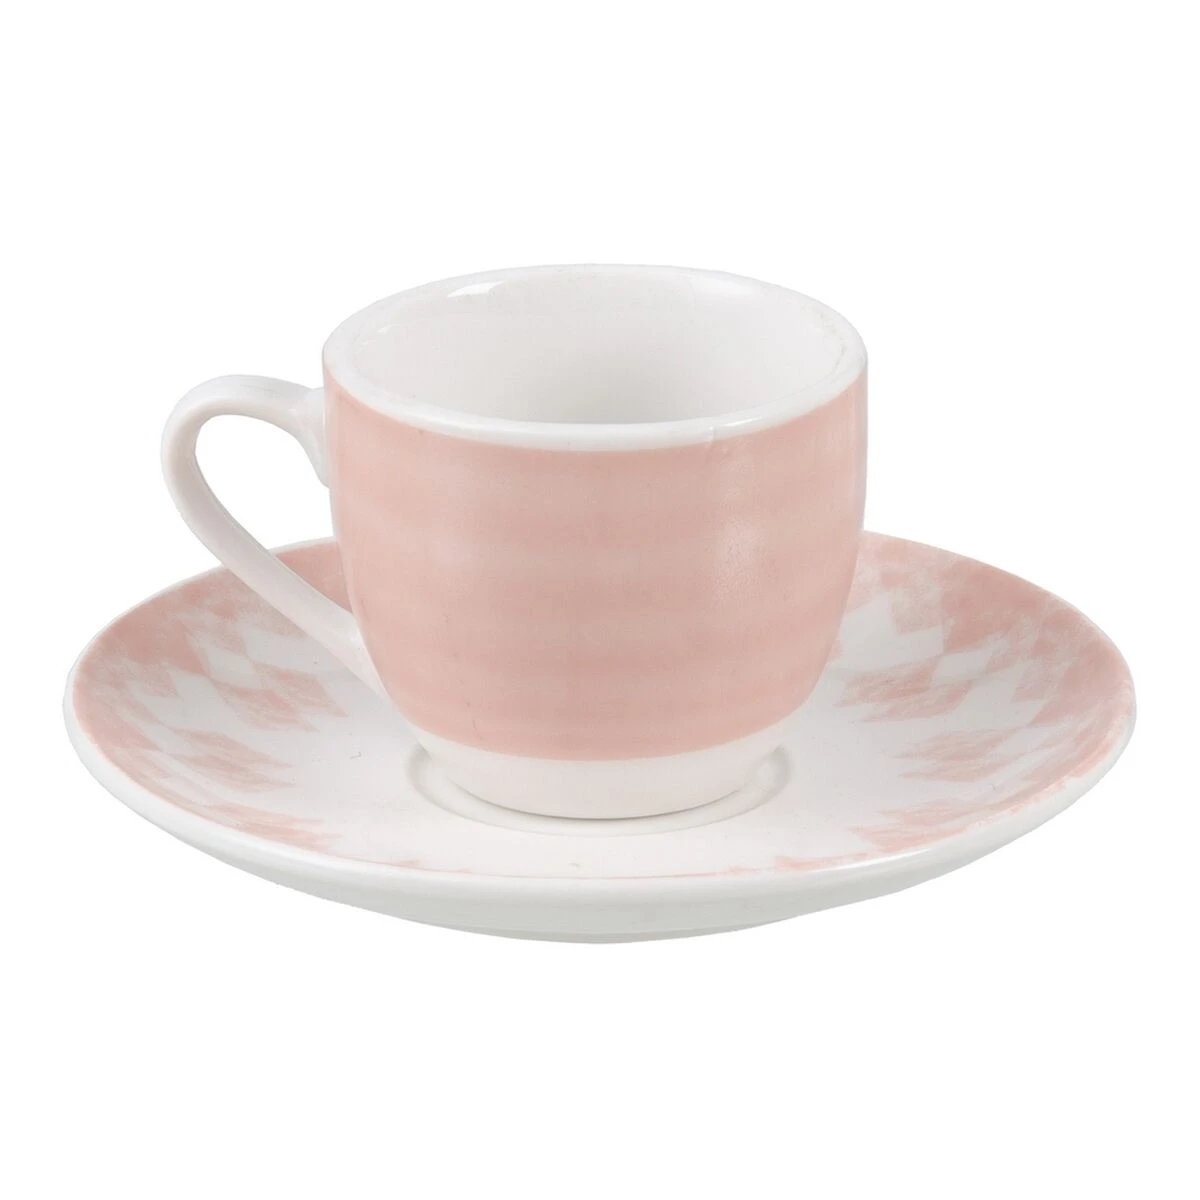 A pink cup with saucer on a white background.